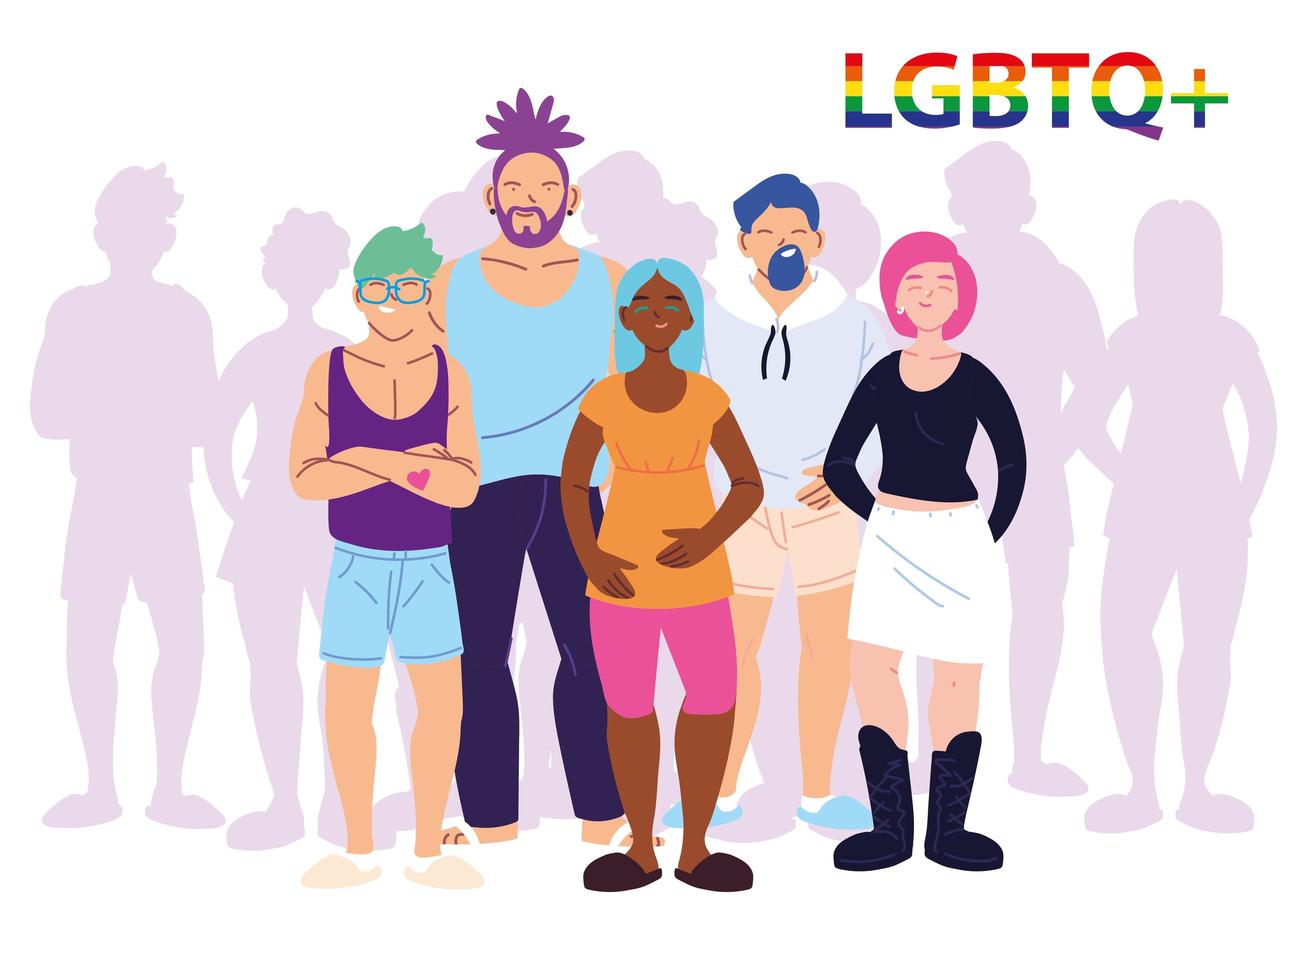 Group of people with LGBTQ gay pride symbol vector